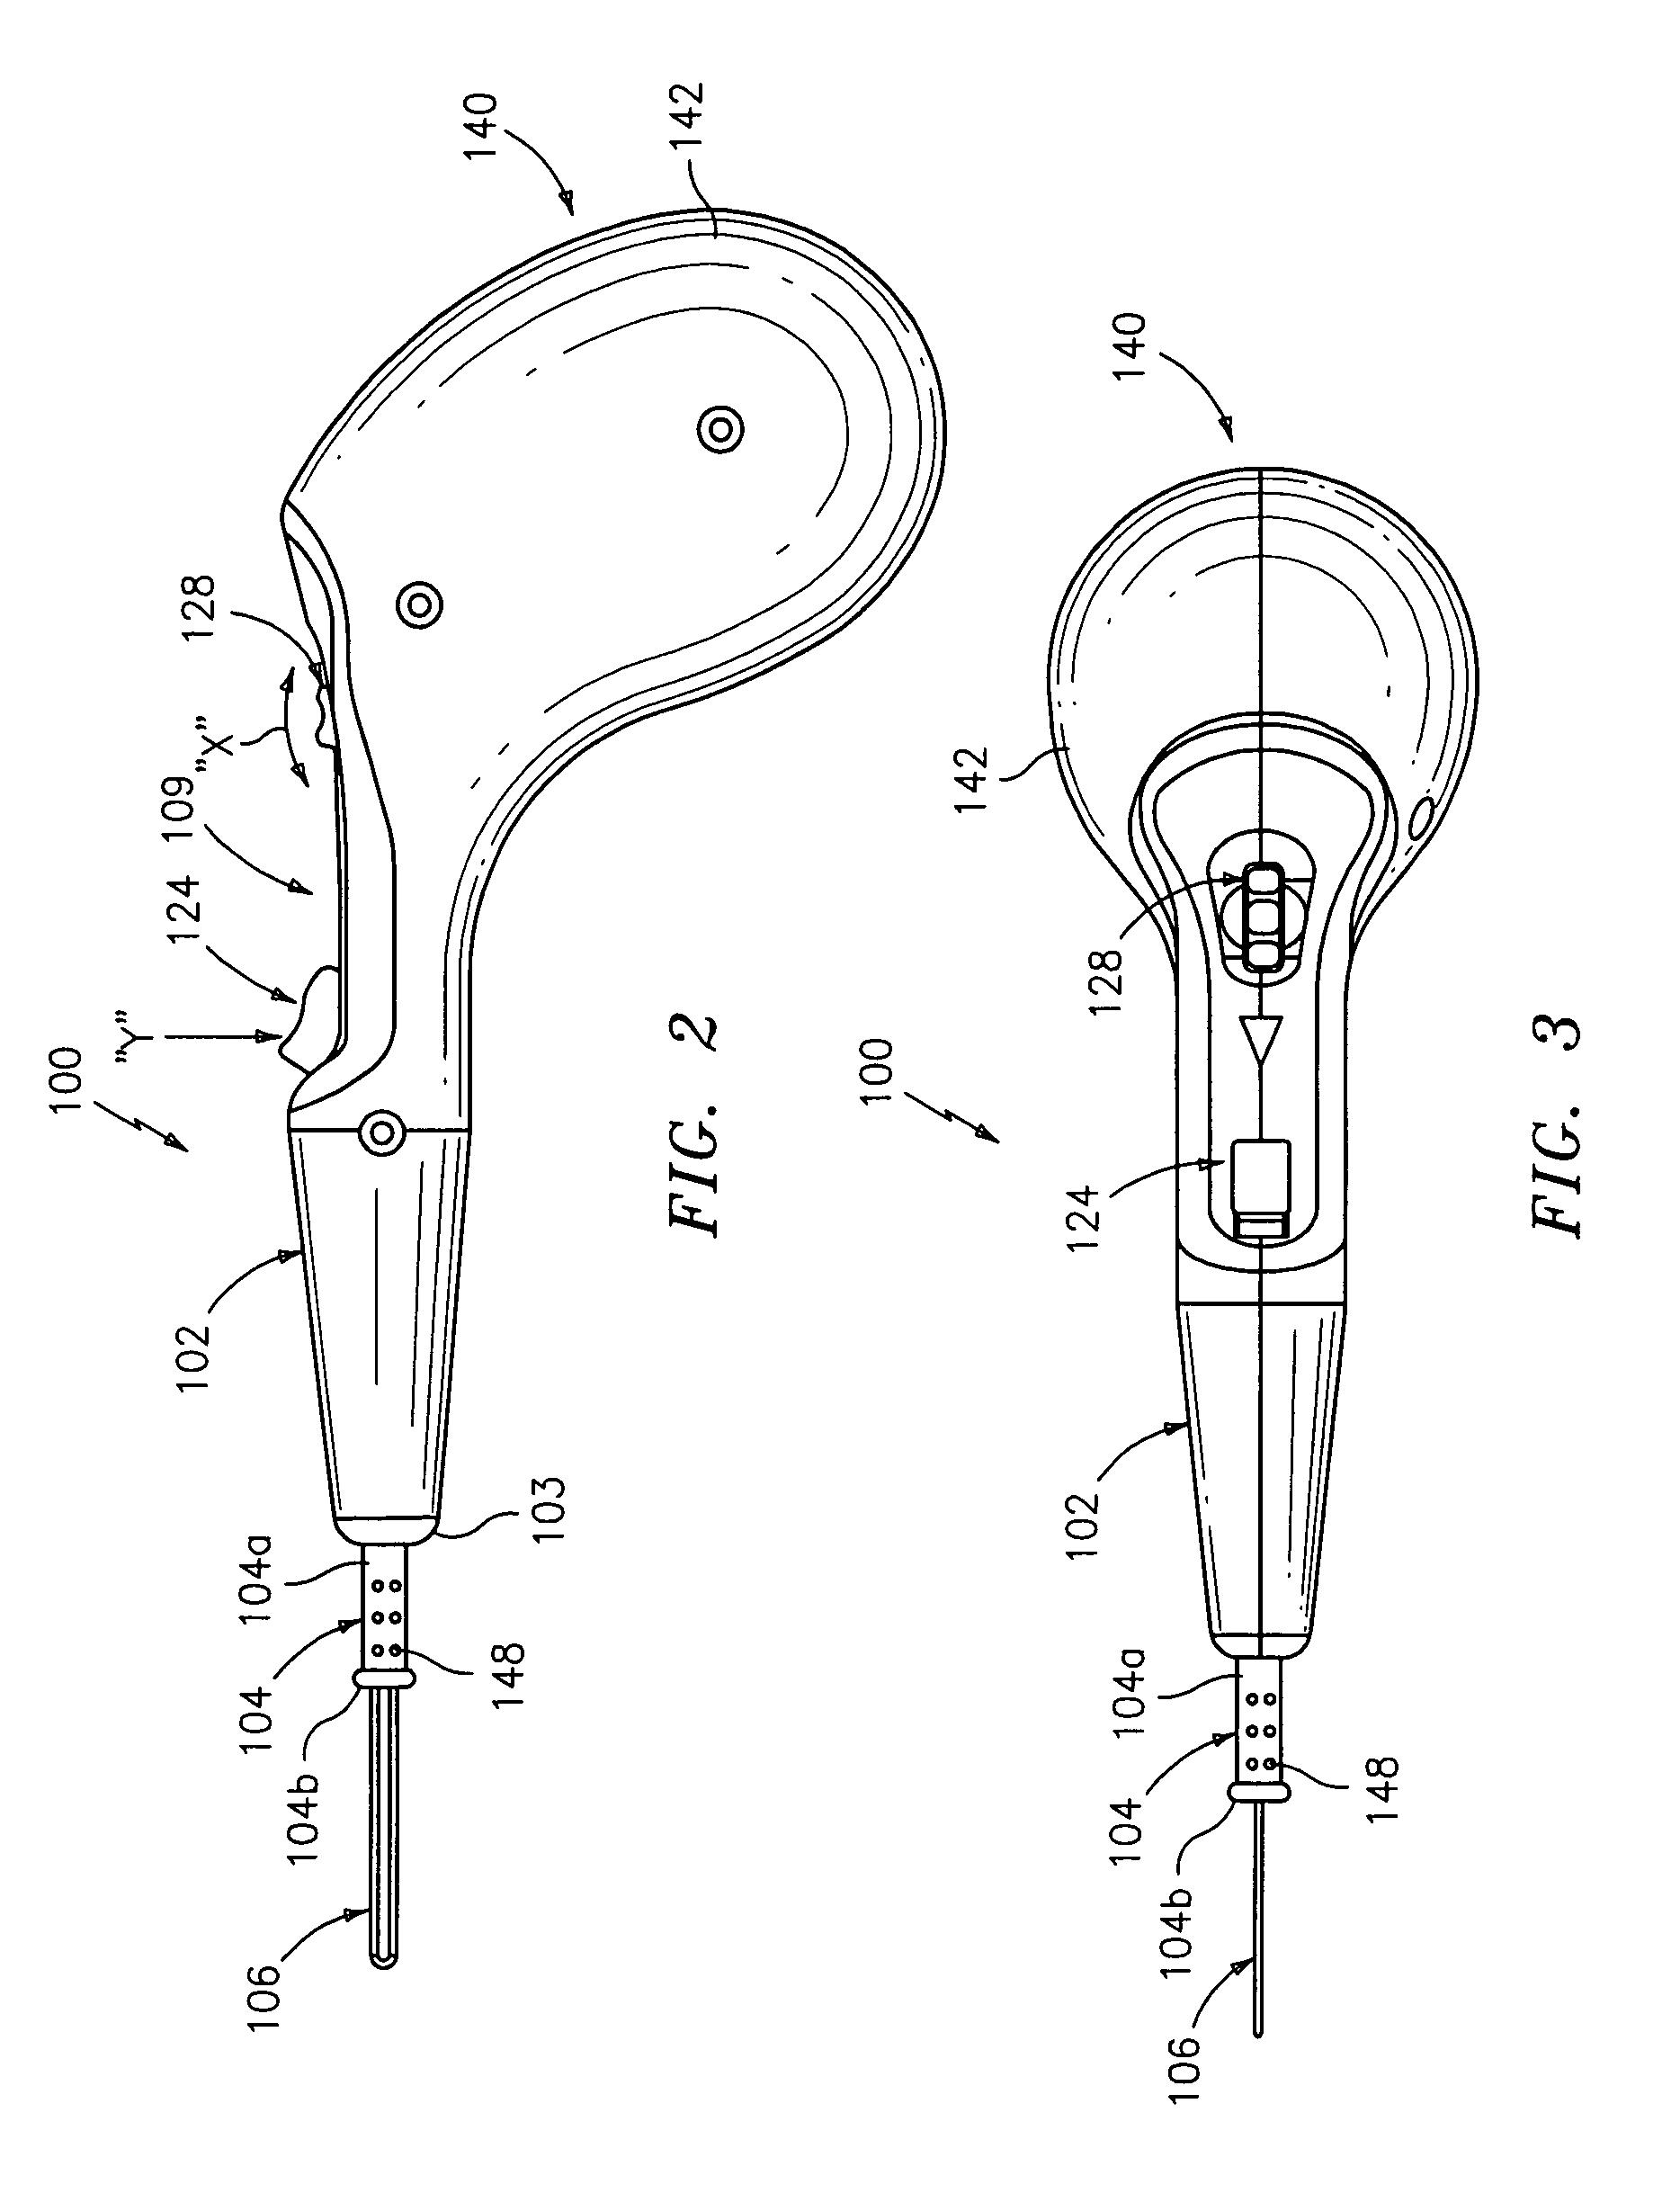 Pistol grip electrosurgical pencil with manual aspirator/irrigator and methods of using the same